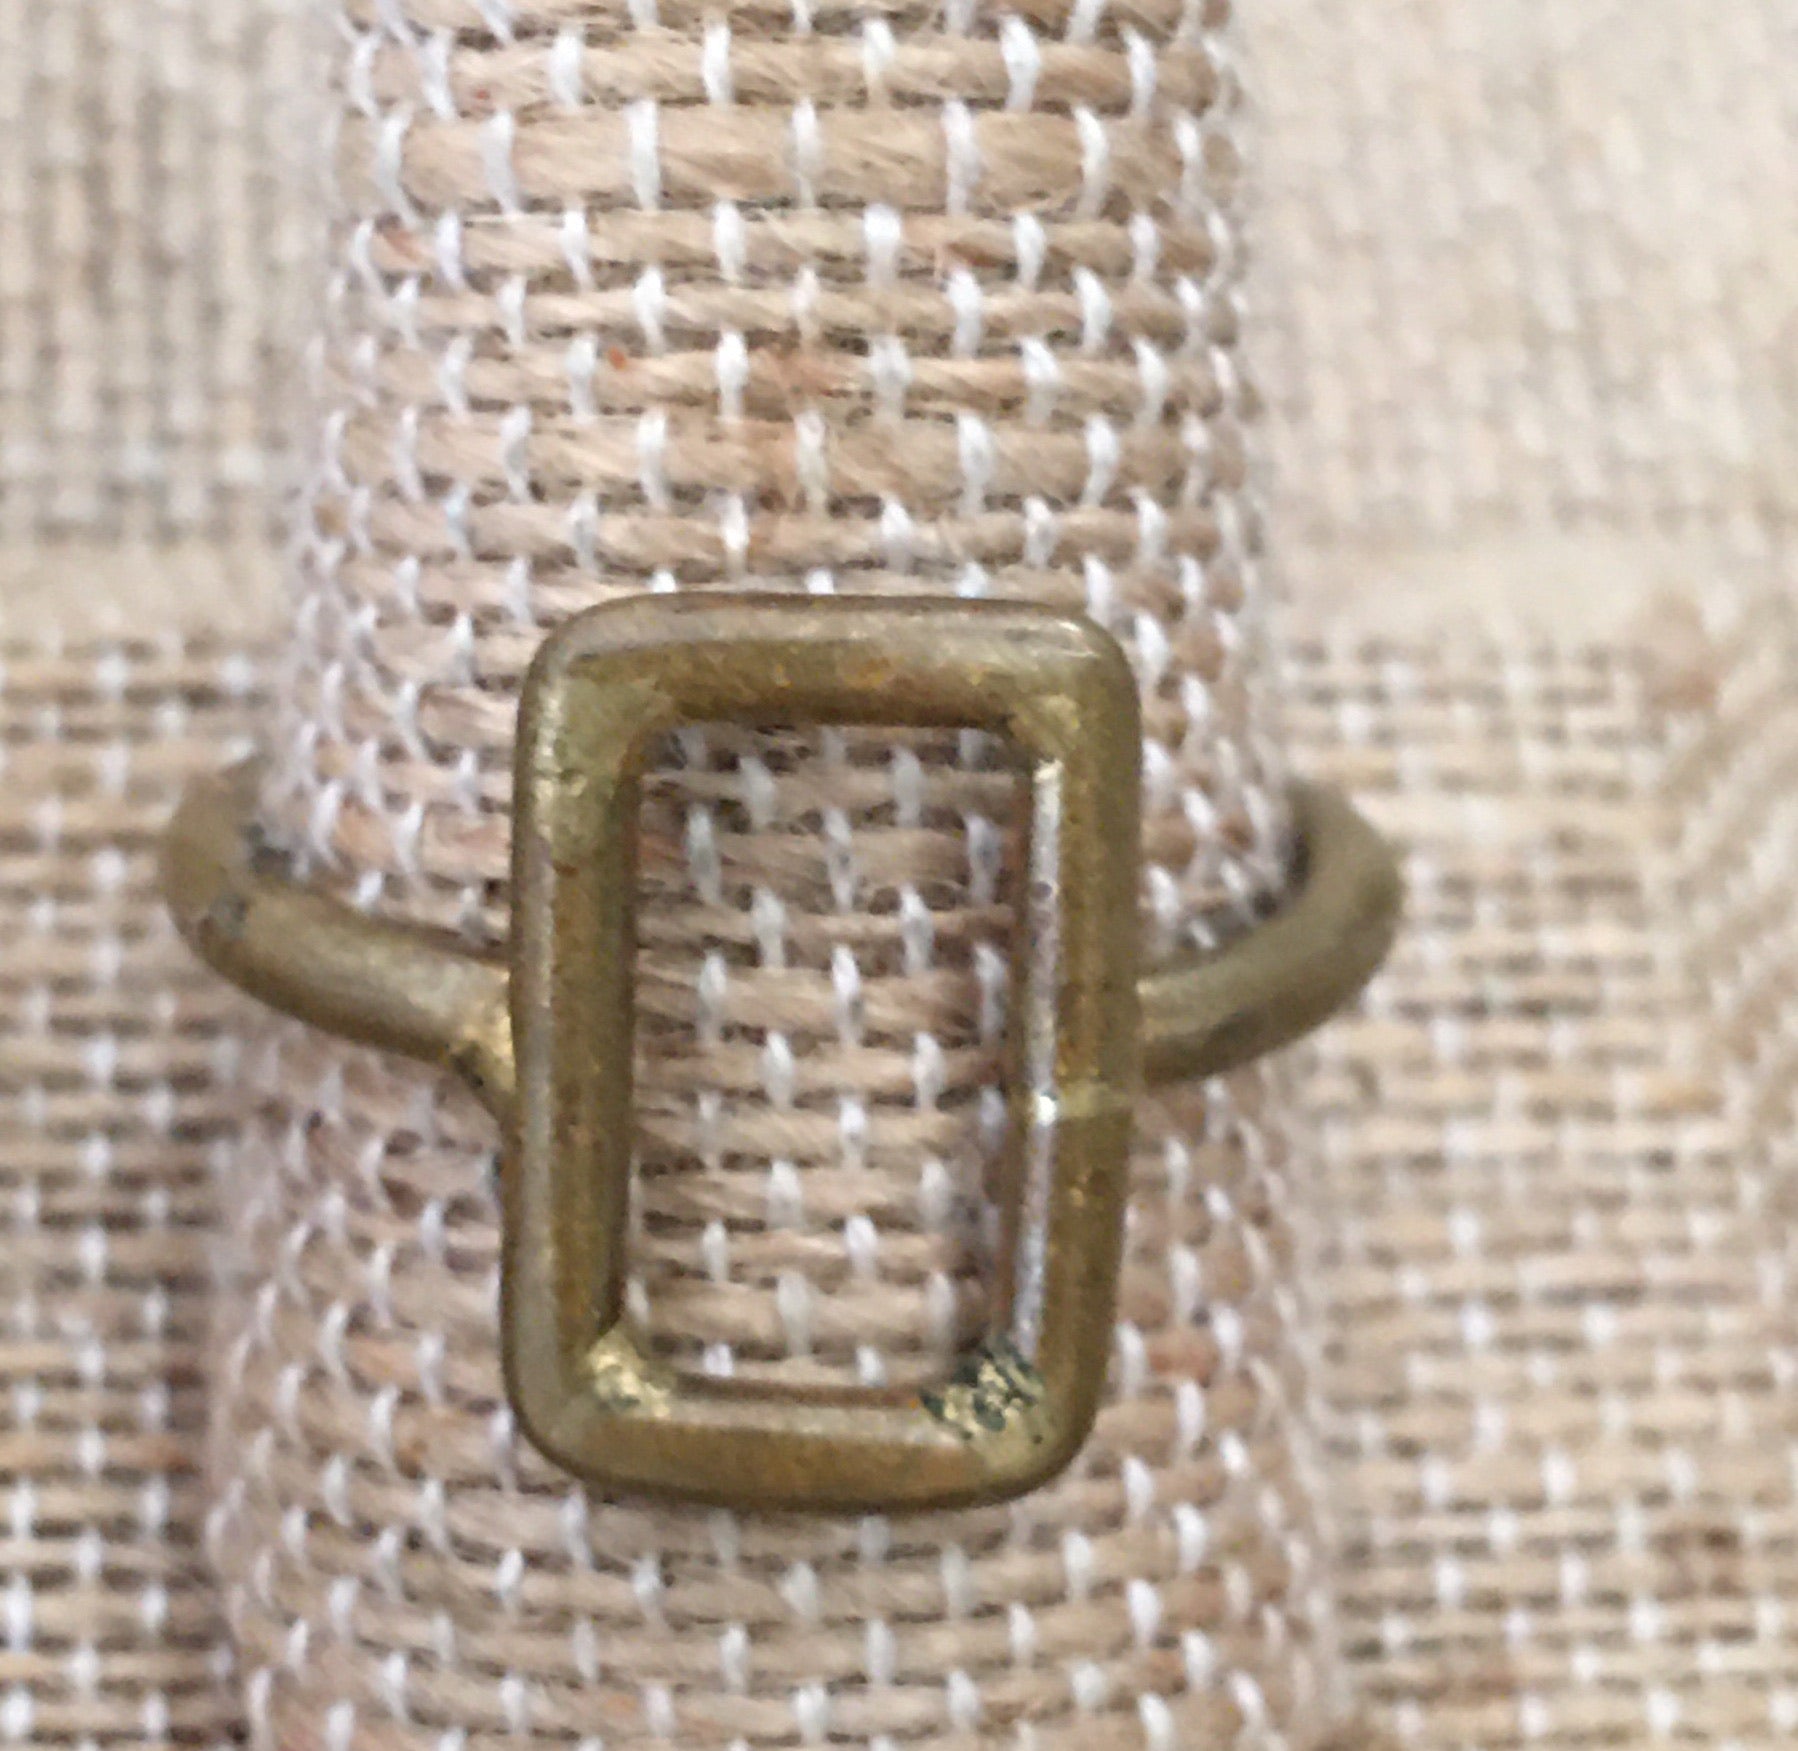 Simple square brass ring